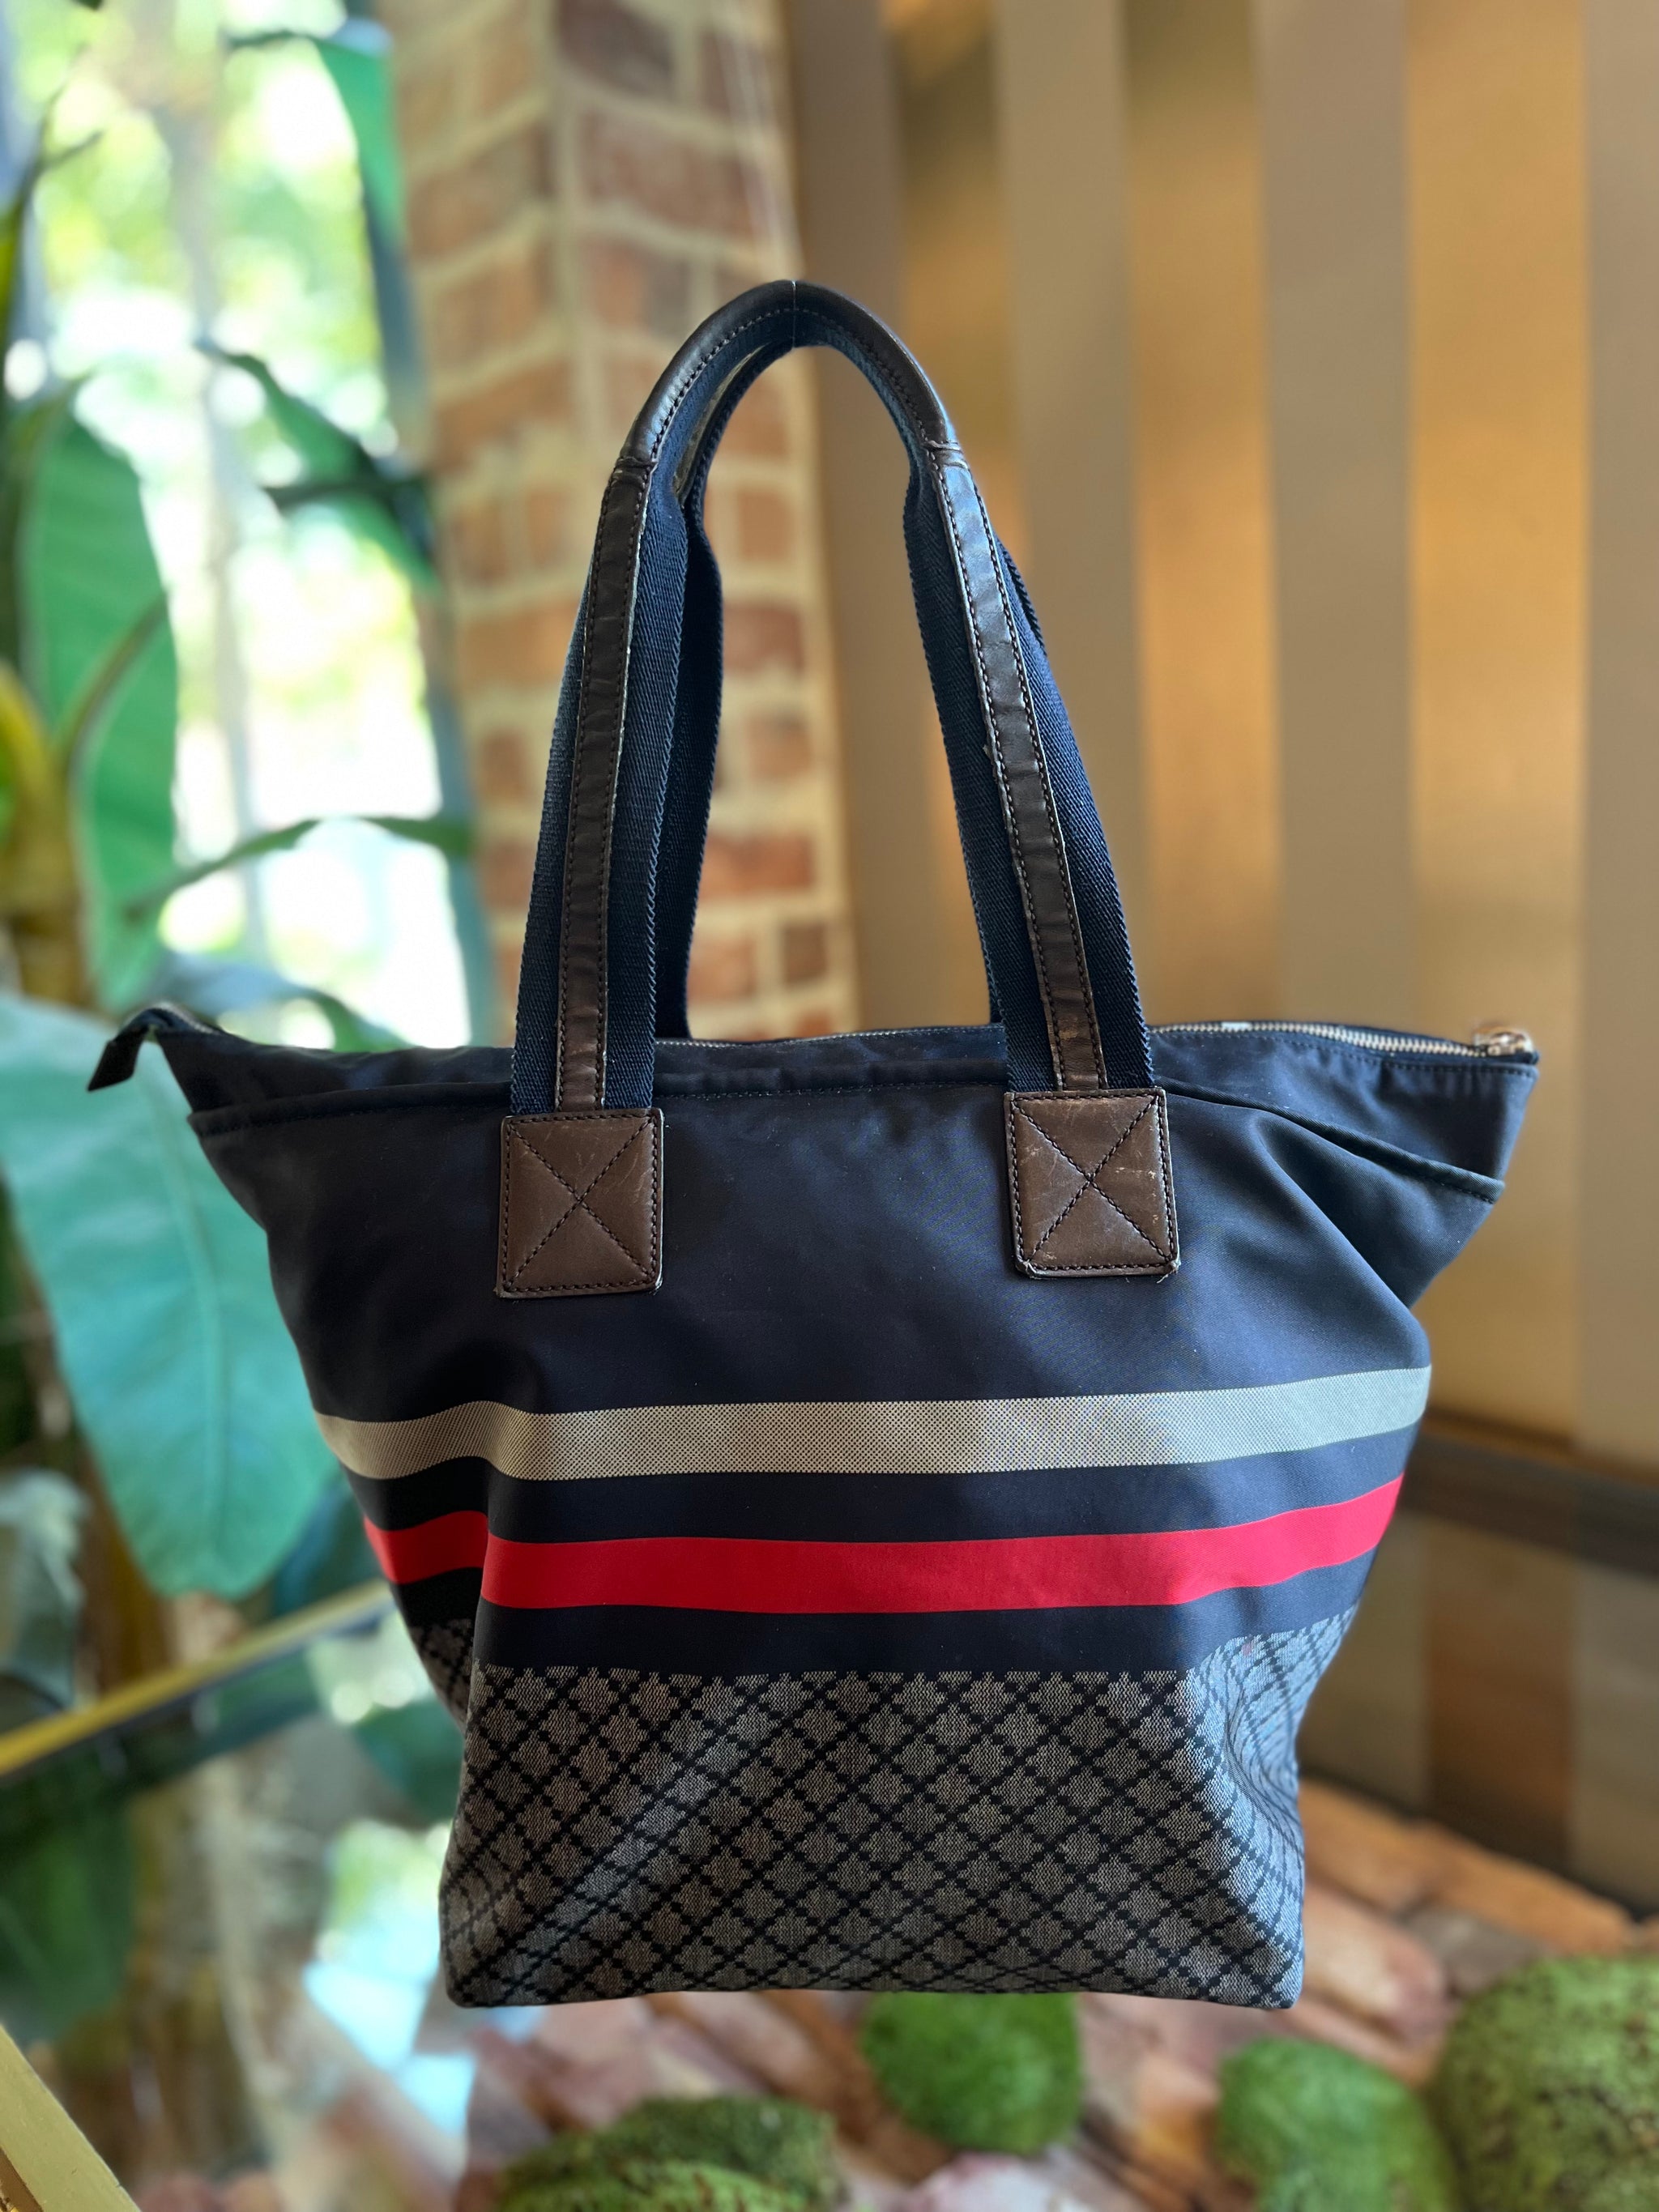 Gucci Navy Blue GG Supreme Canvas Leather Medium Carry On Duffle Bag Gucci